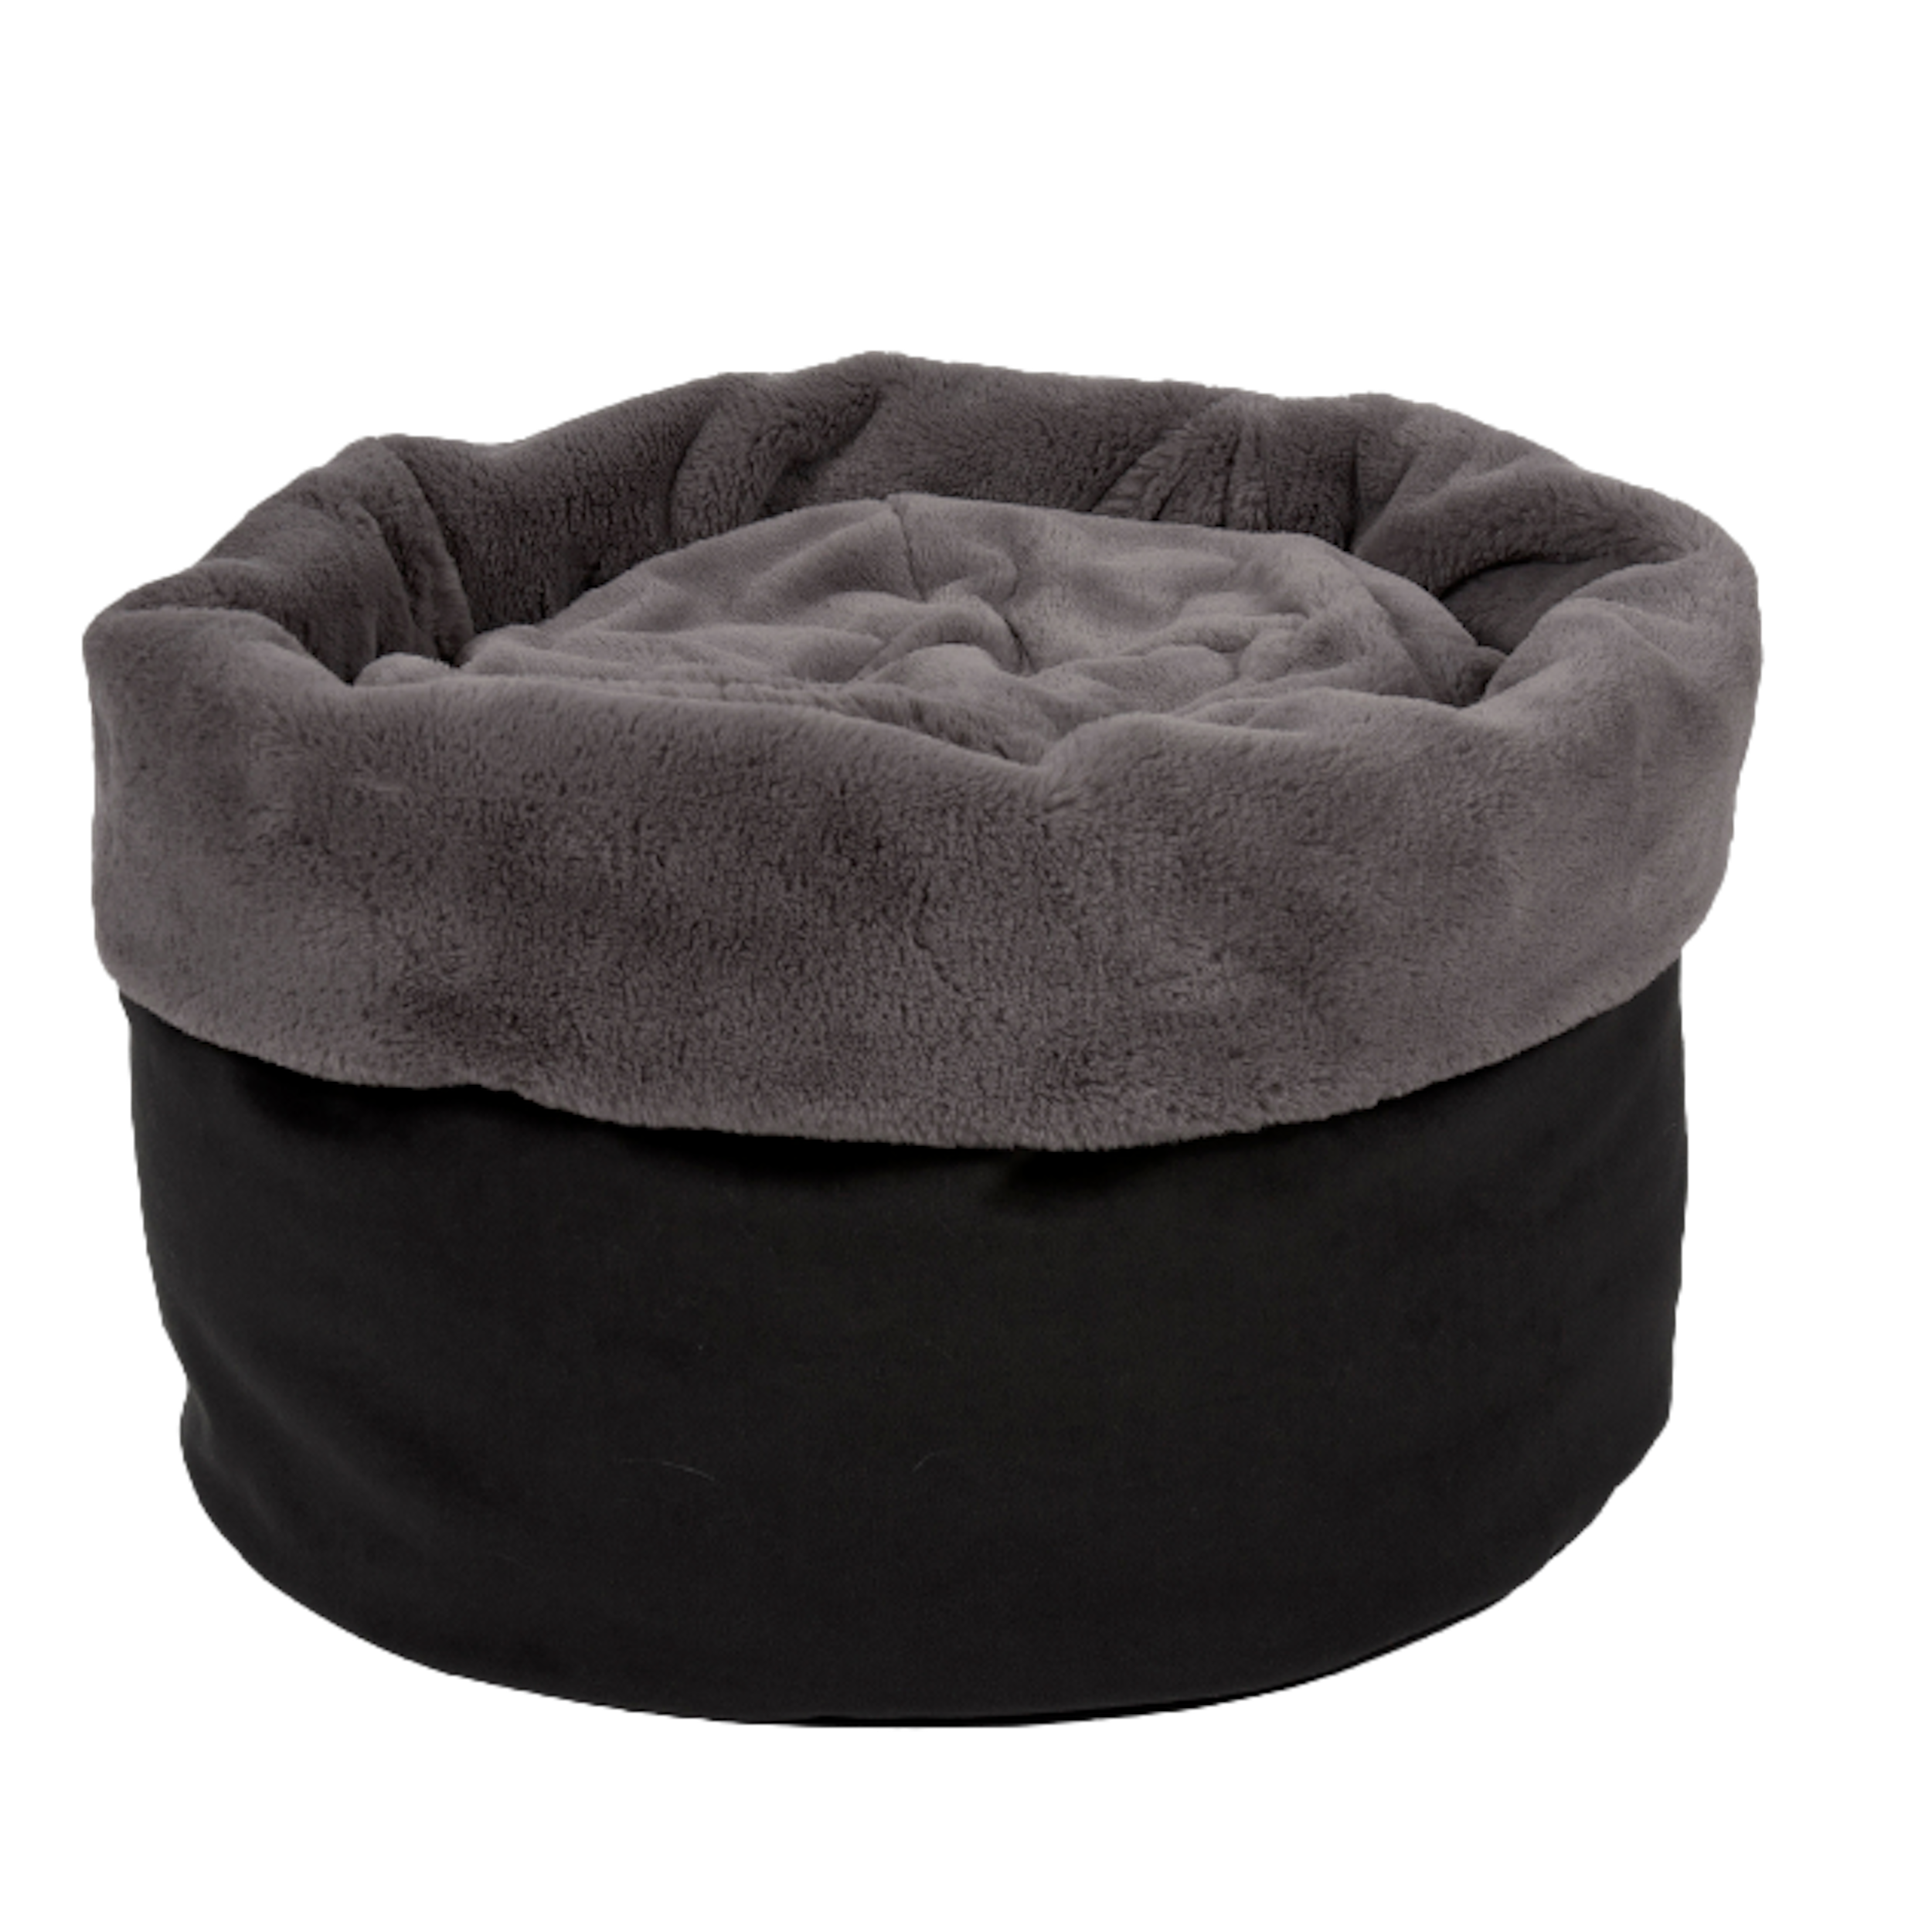 DOG-BED-BURROW-COVER-CHARCOAL-GRAY